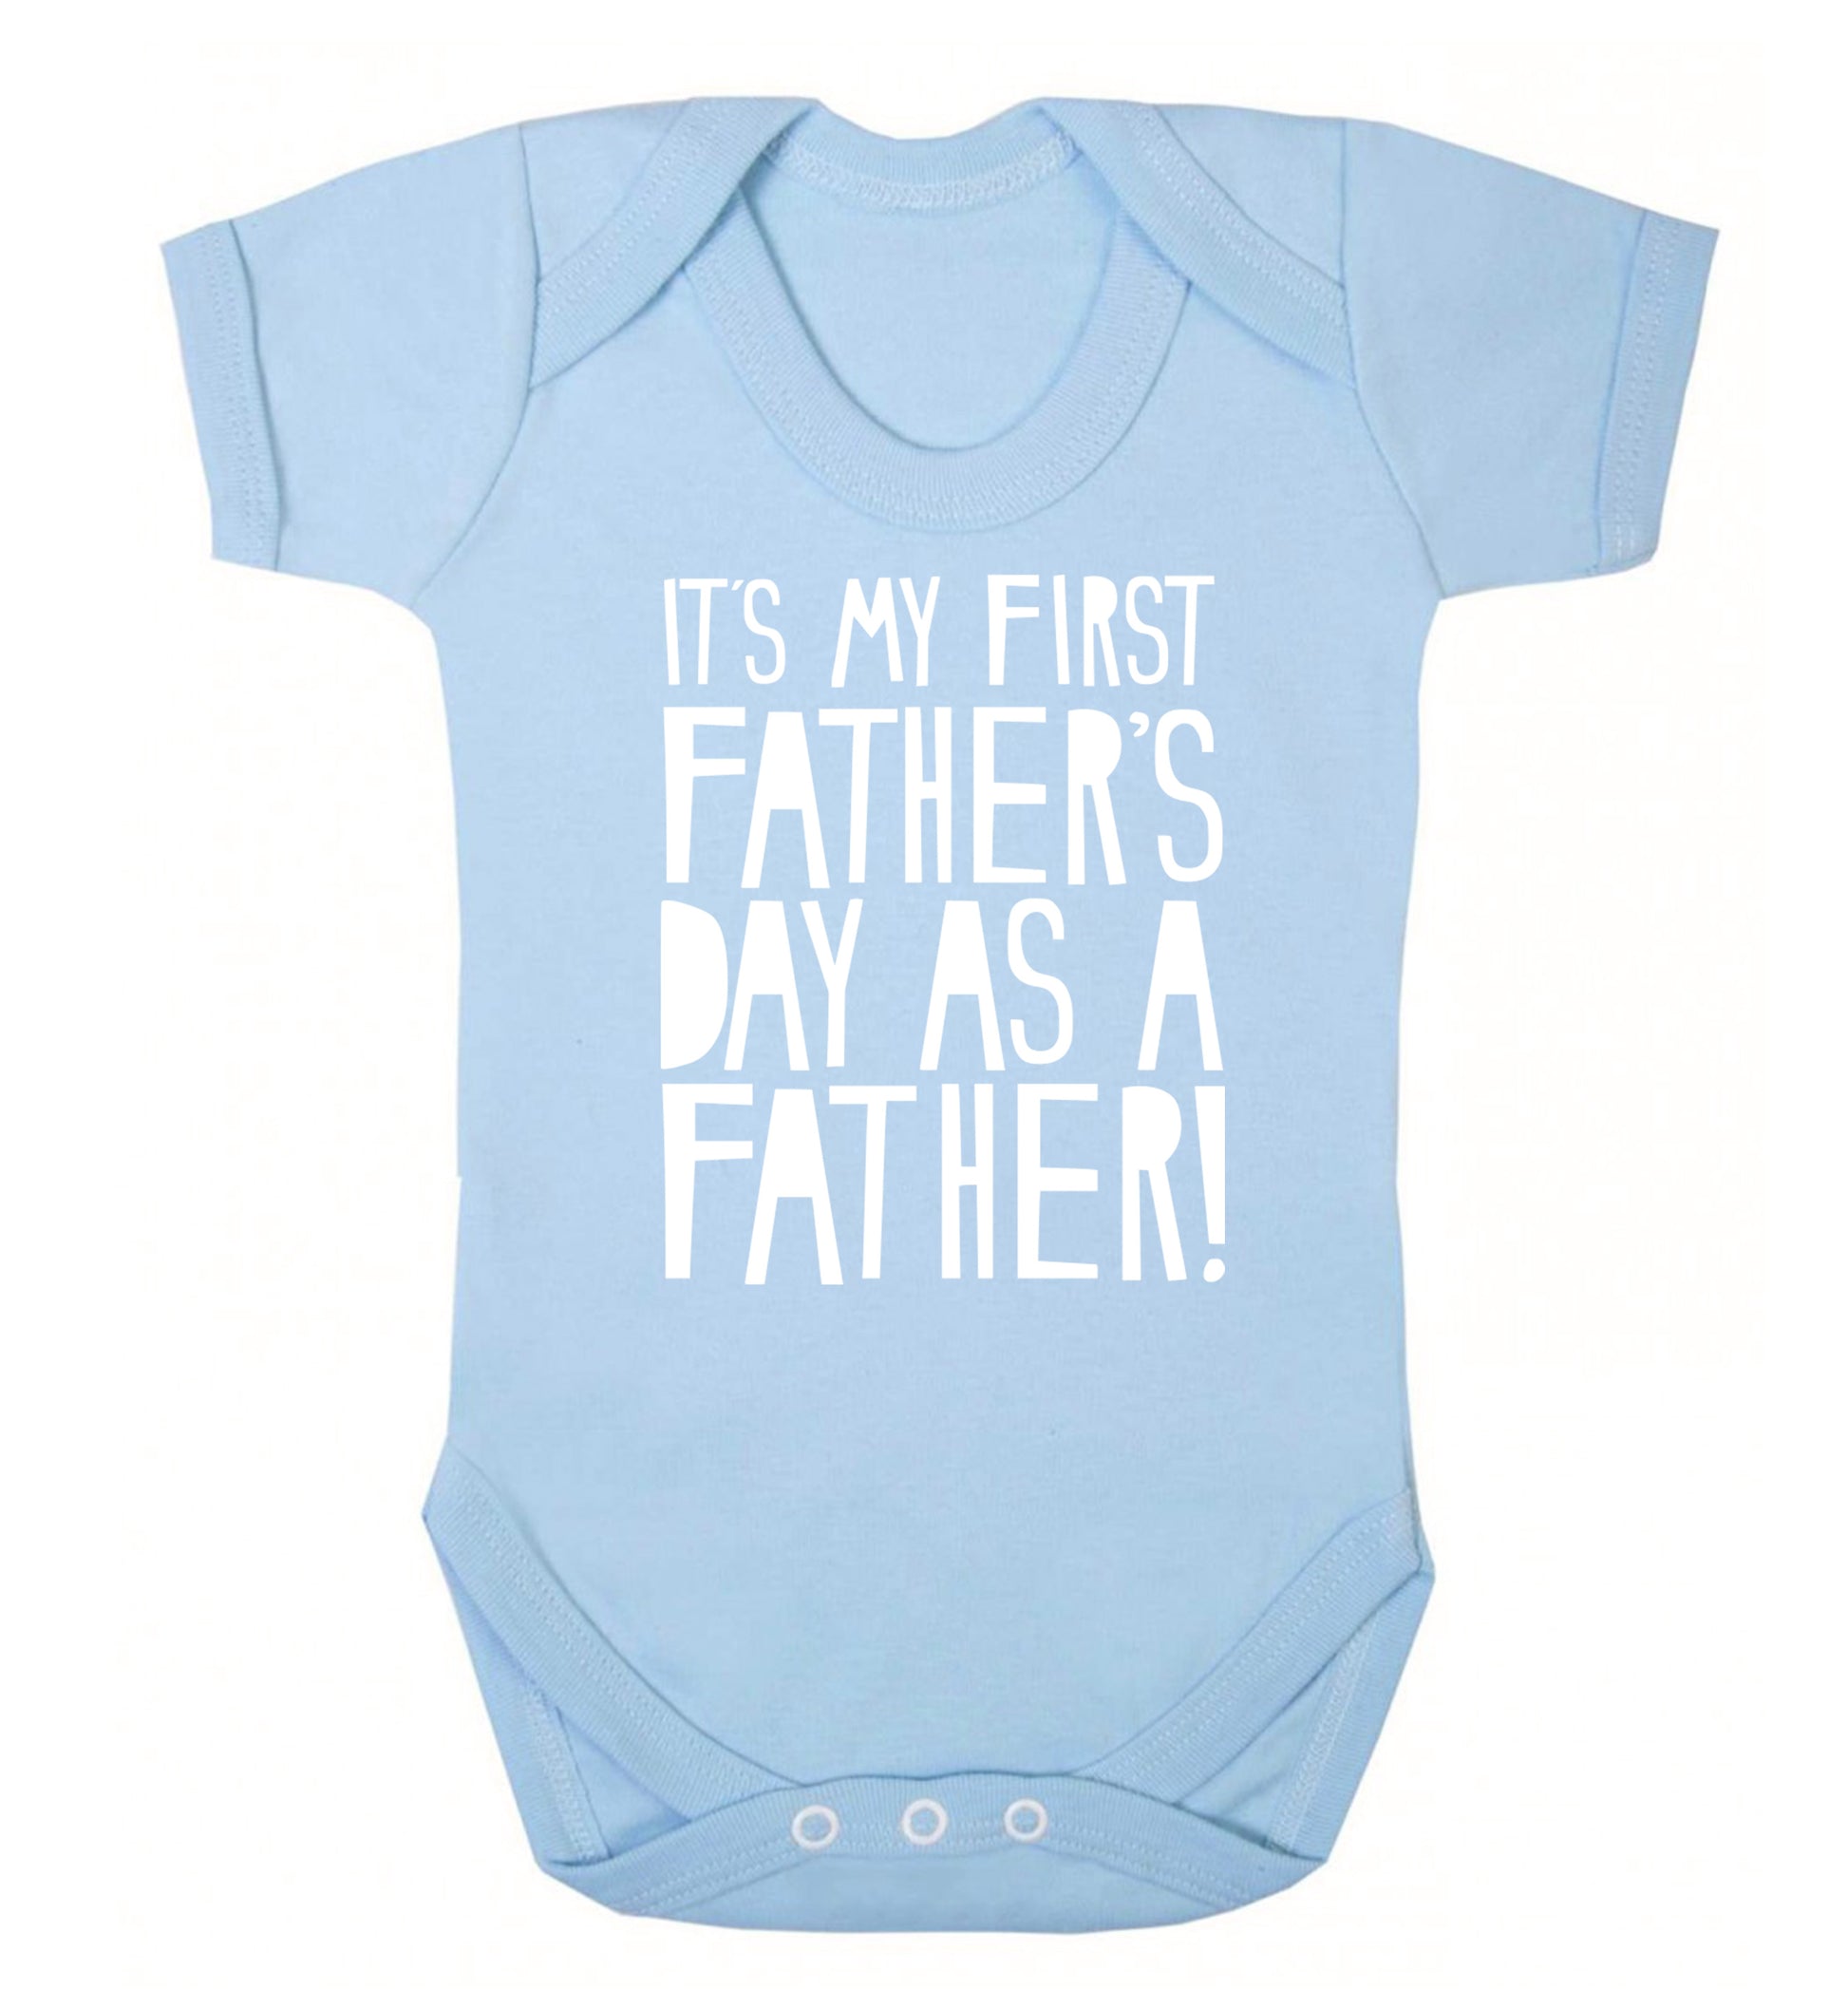 It's my first Father's Day as a father! Baby Vest pale blue 18-24 months